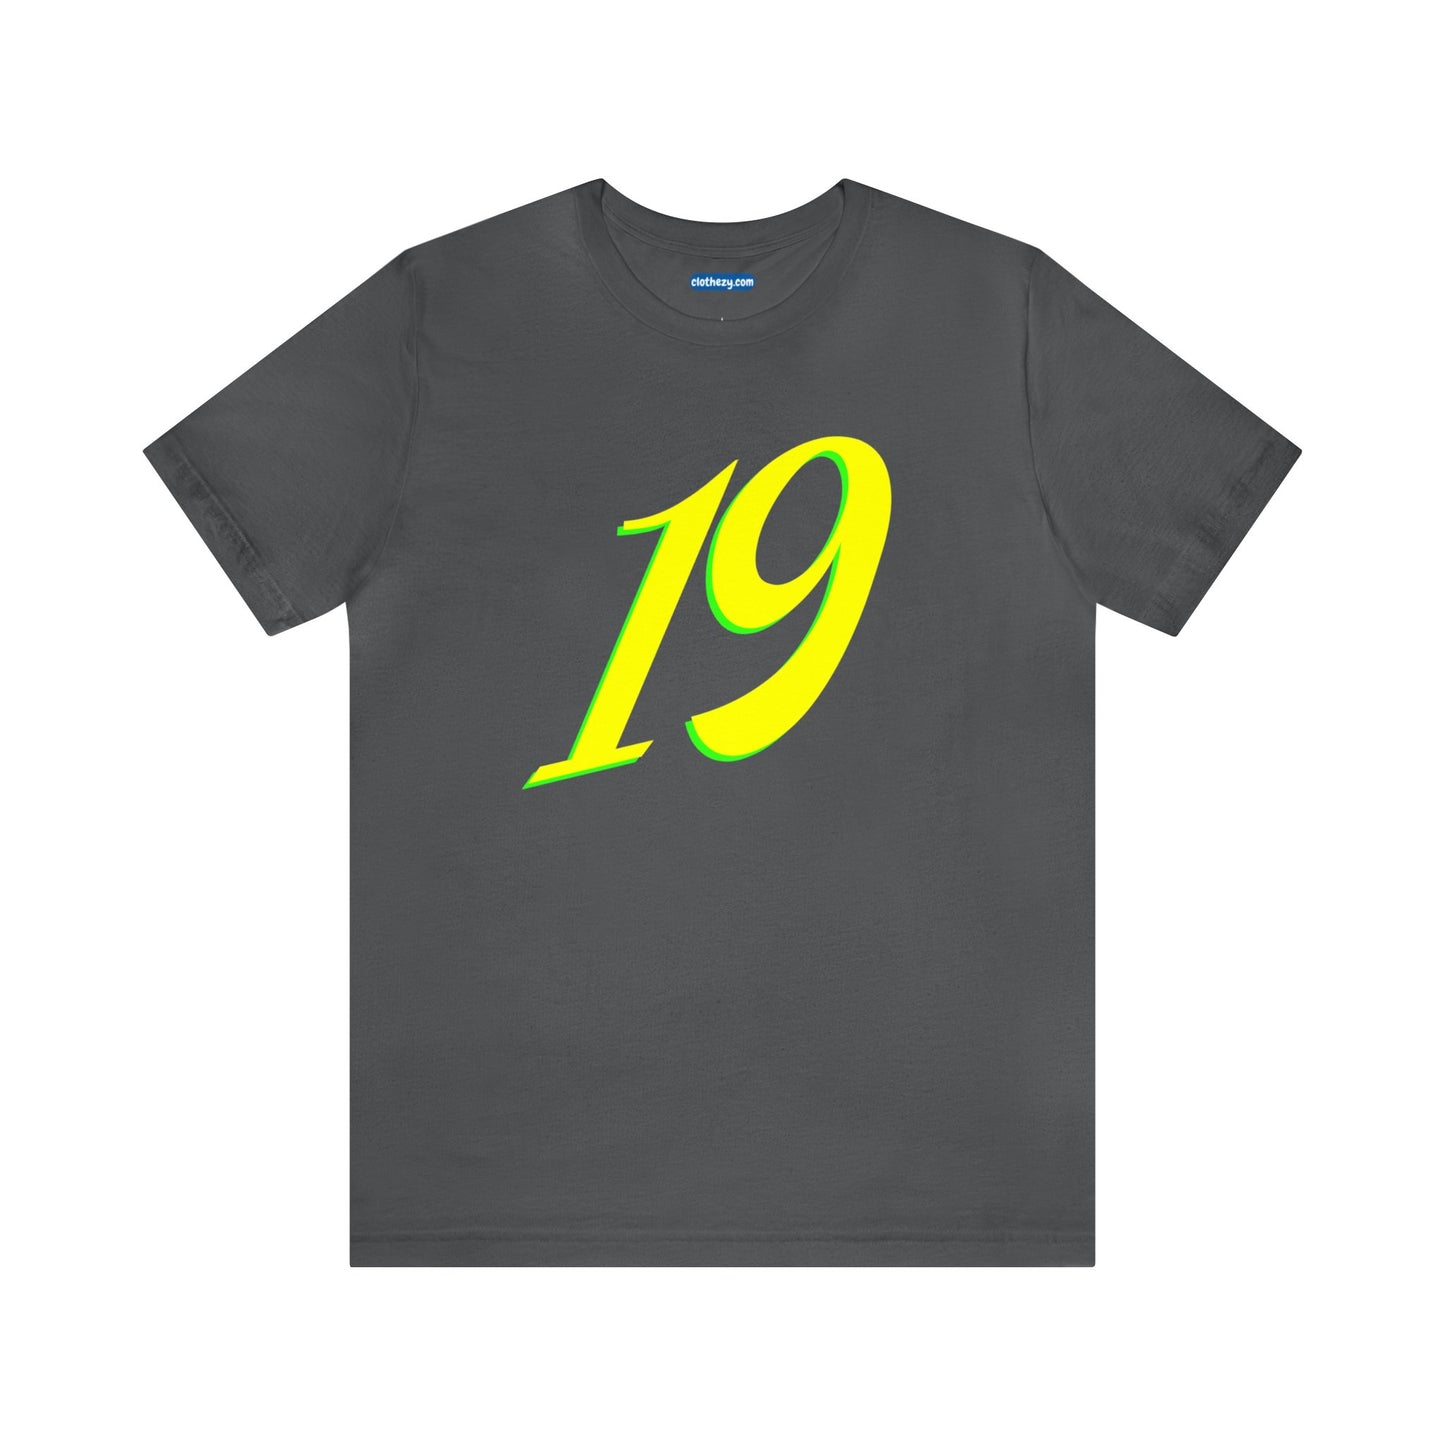 Number 19 Design - Soft Cotton Tee for birthdays and celebrations, Gift for friends and family, Multiple Options by clothezy.com in Black Size Small - Buy Now